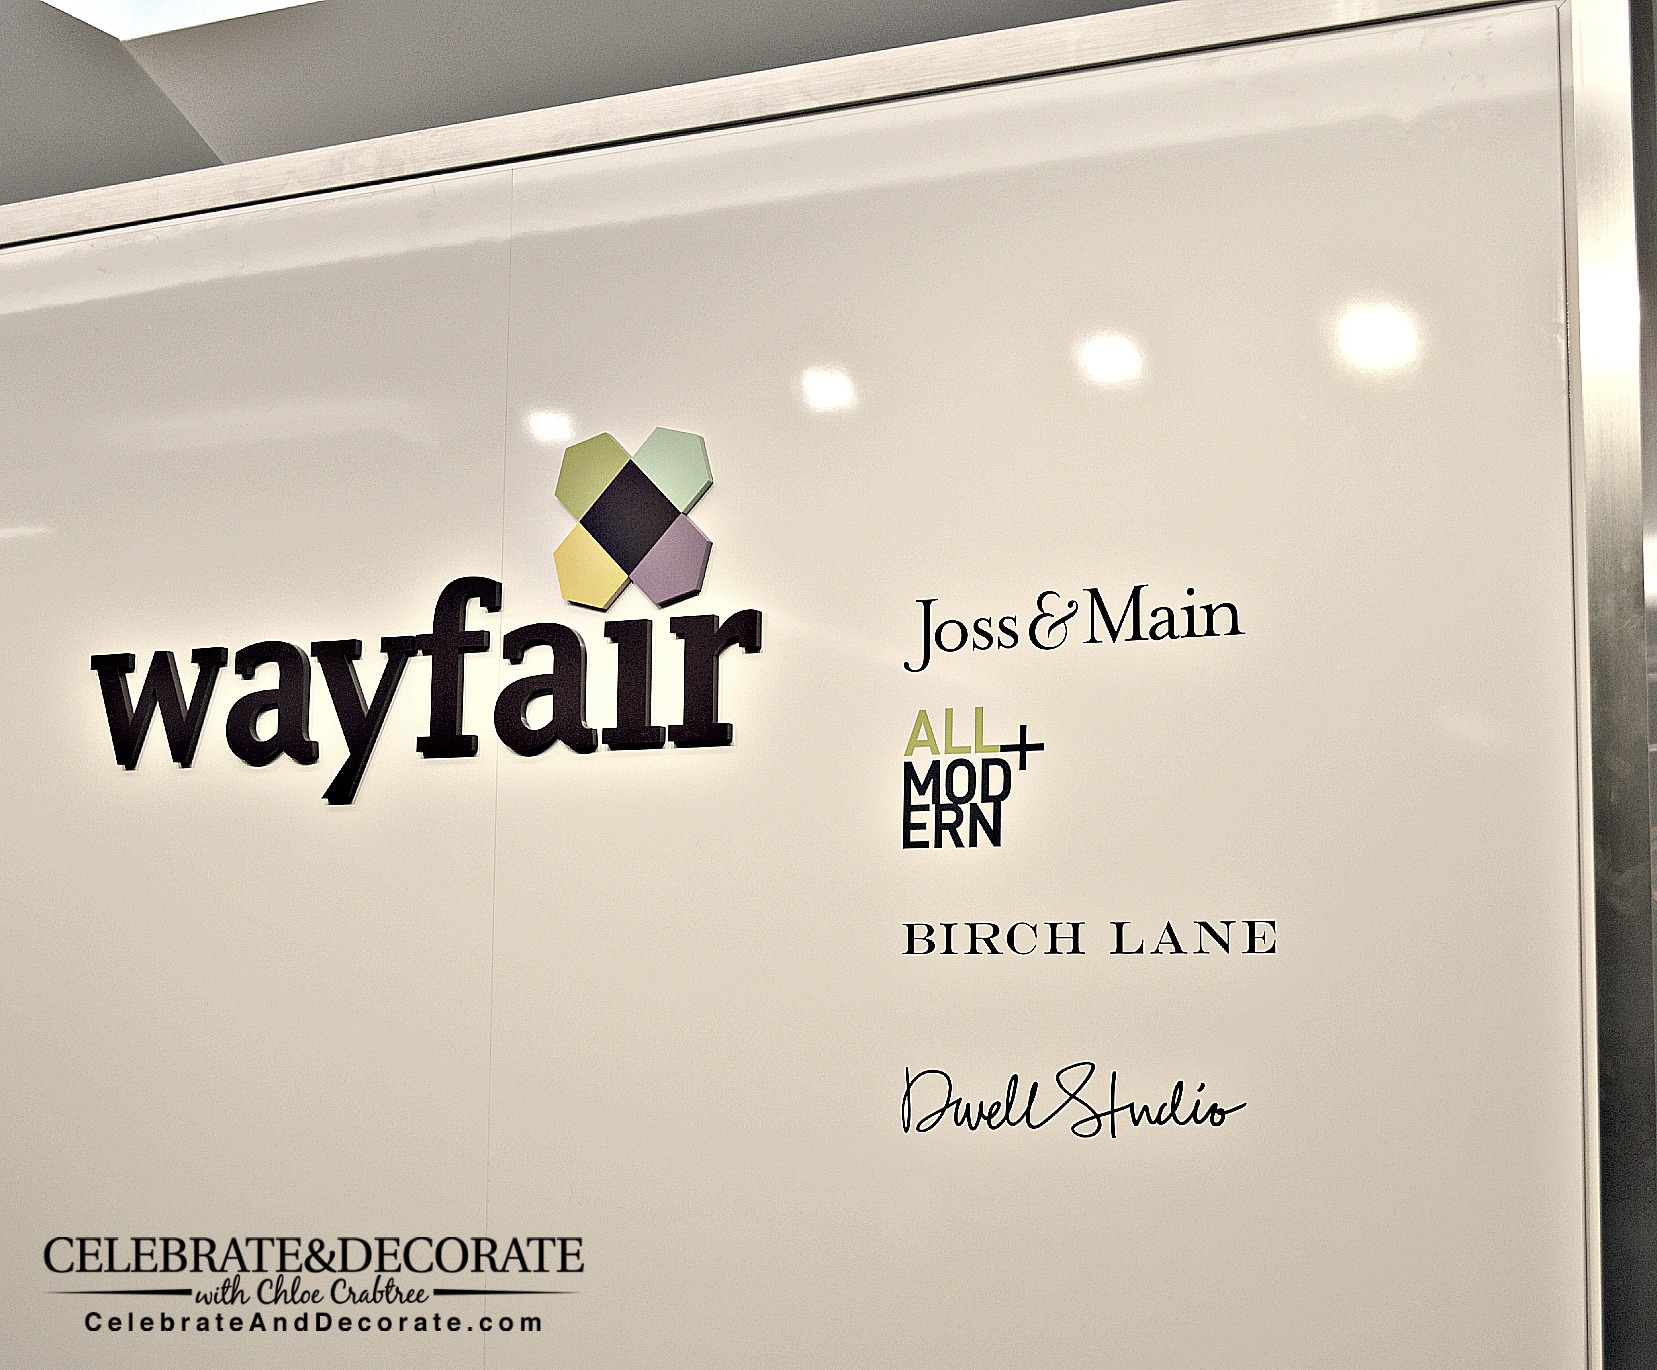 The Wayfair Heart Home Conference